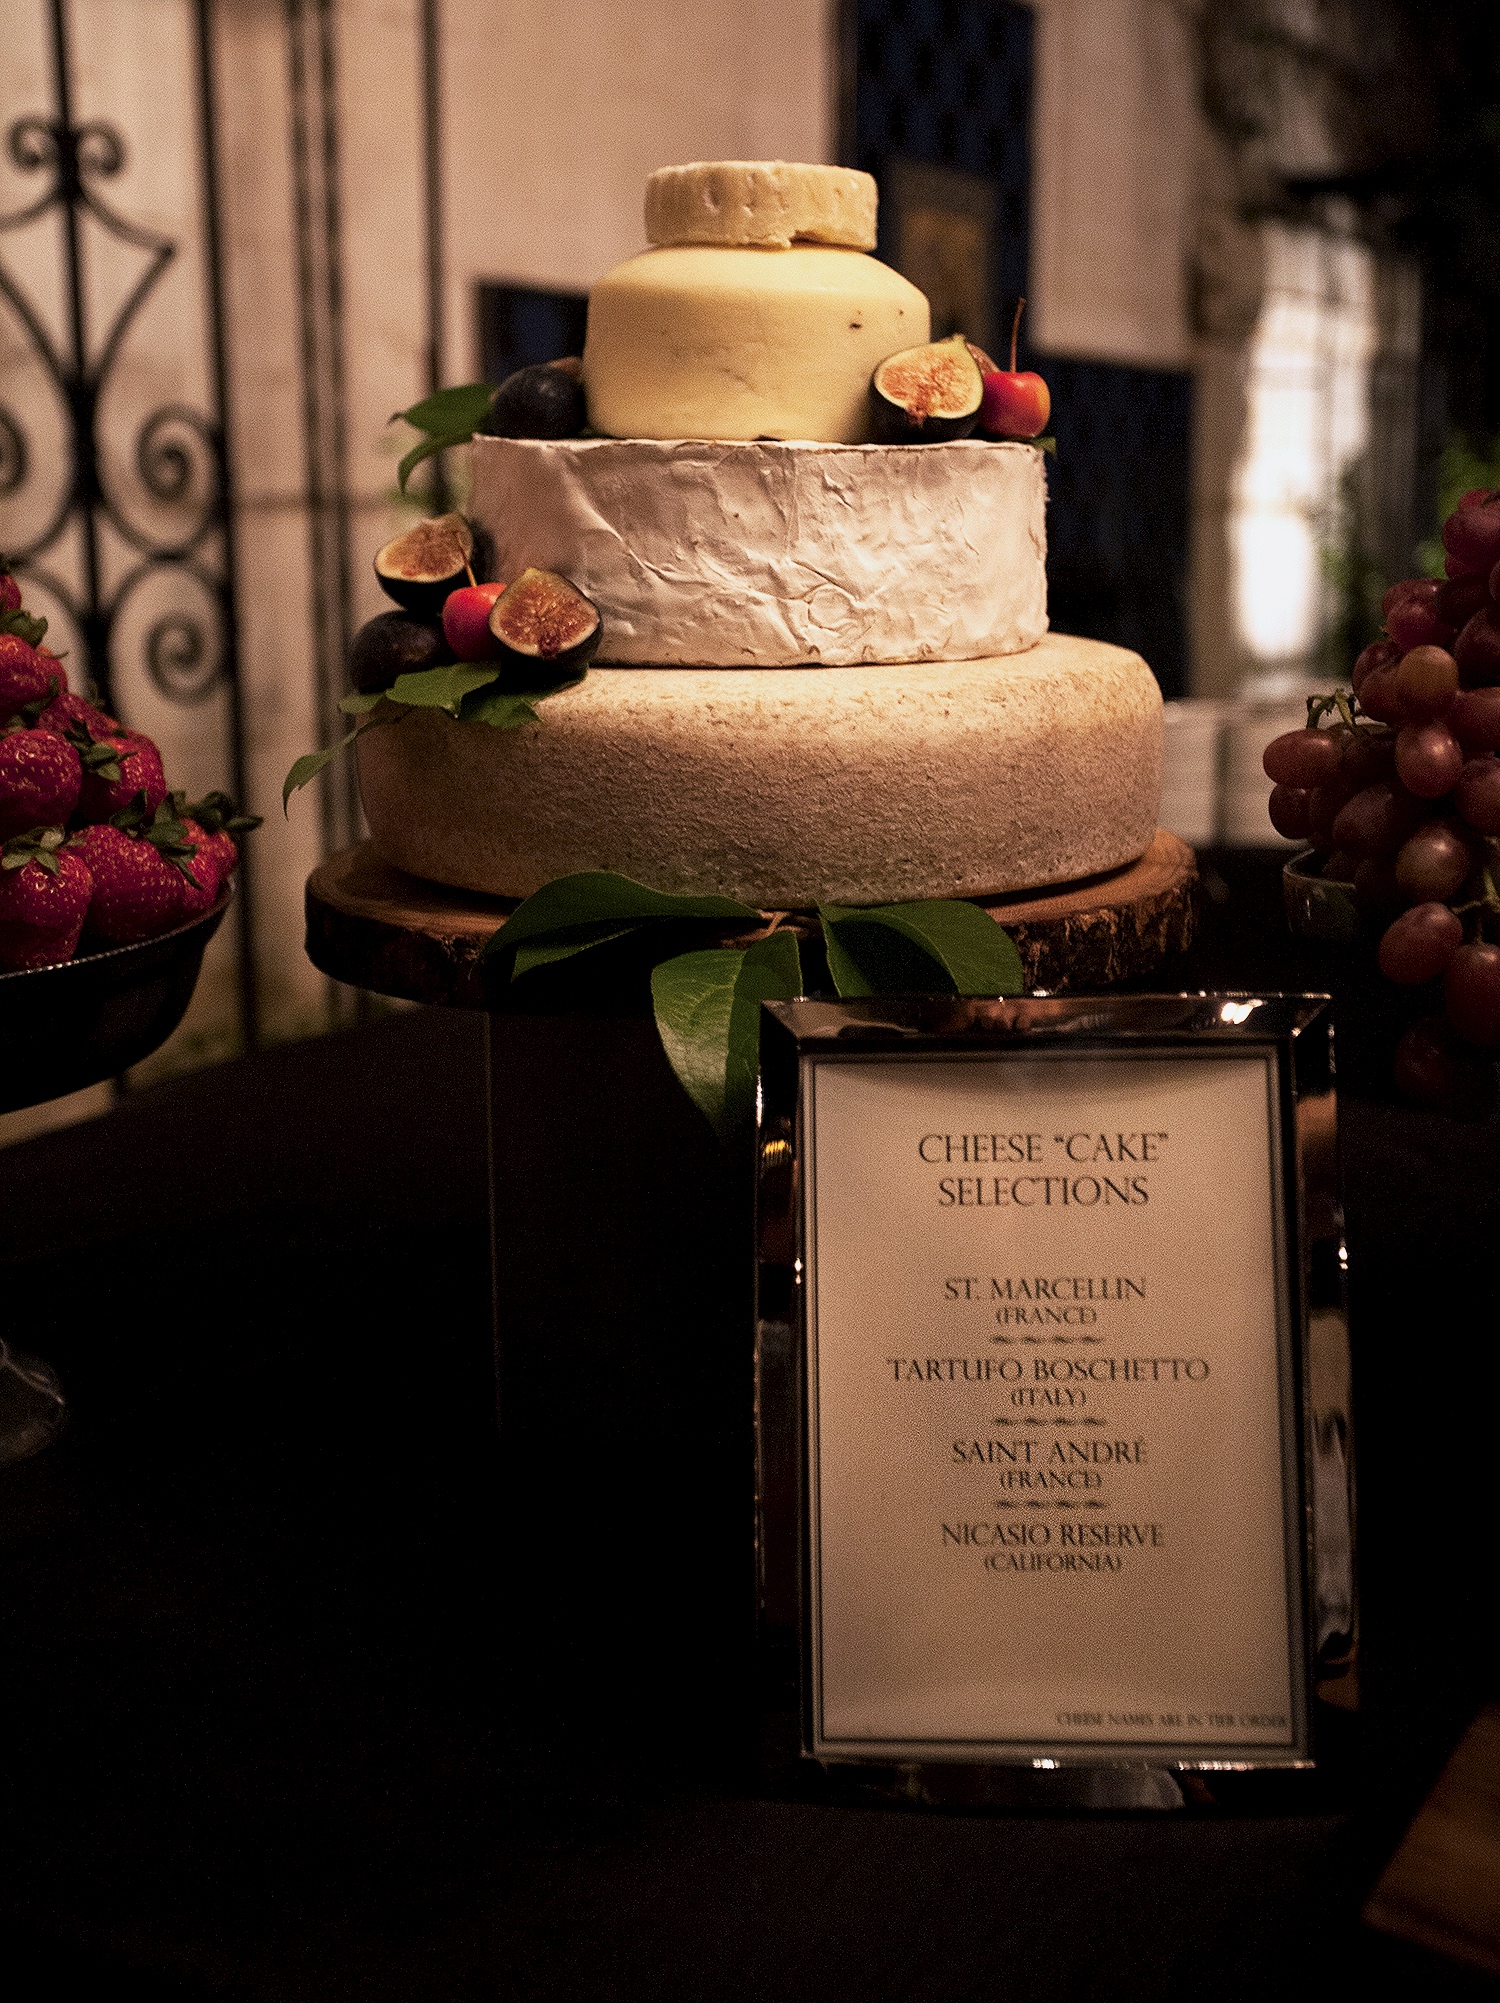 Cheese "cake" with Saint Marcellin, Bucheron, Saint Andre, and Nicasio Reserve 